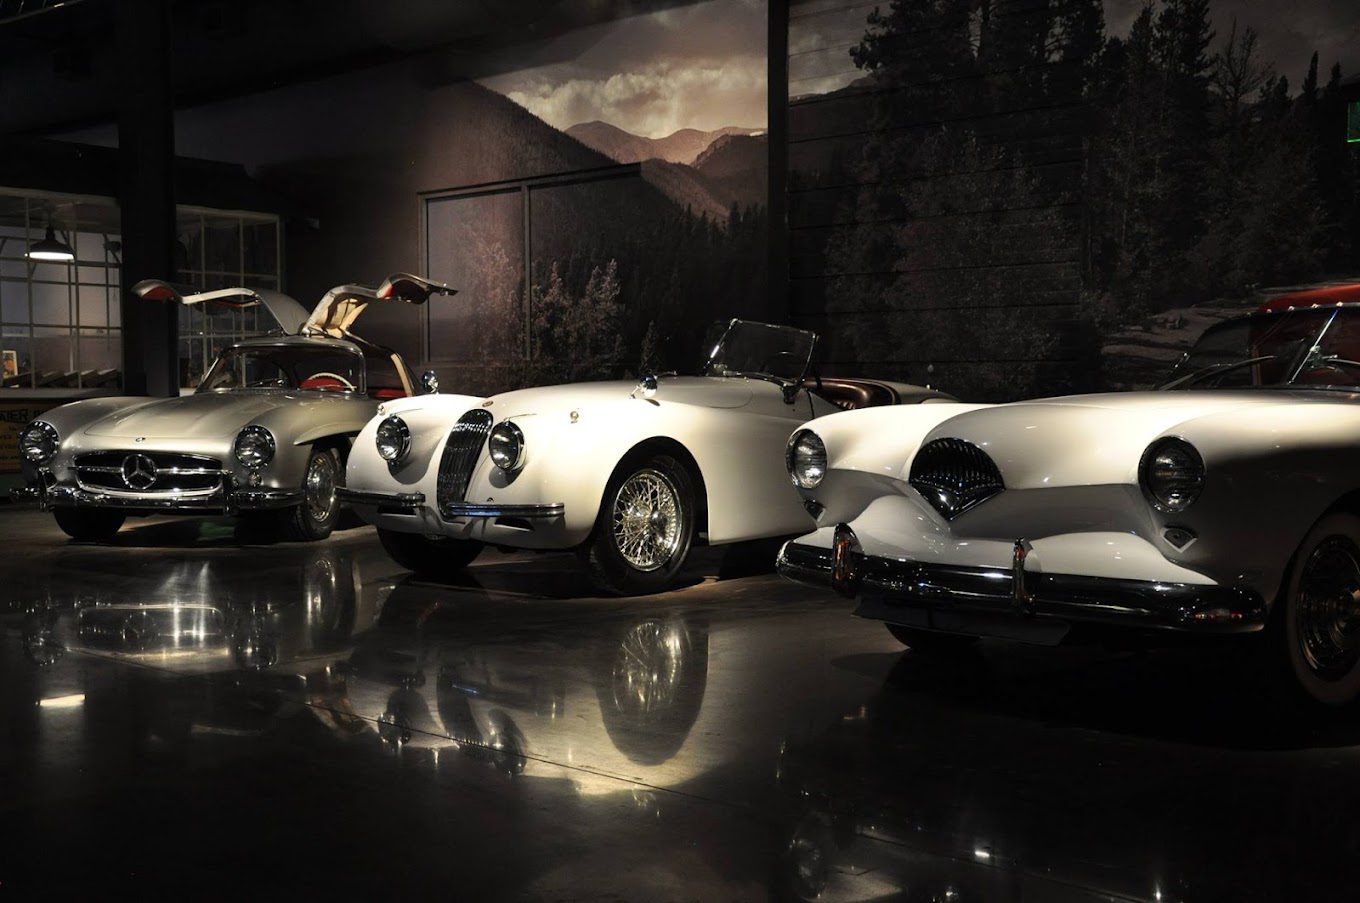 image of rare vehicles from vehicle vault museum